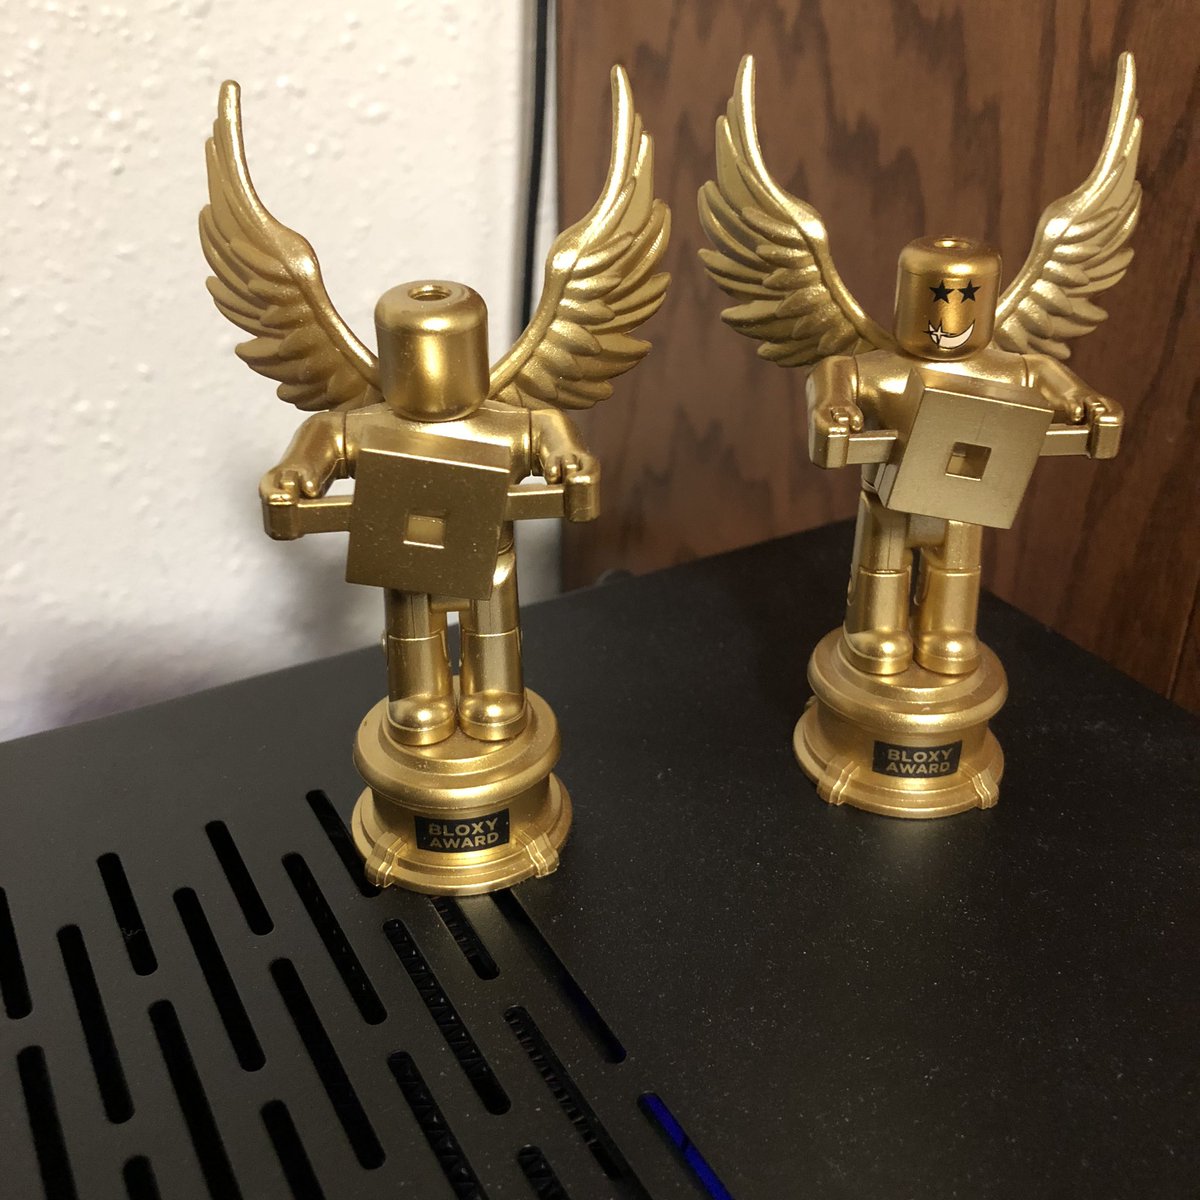 Andrew Mrwindy Willeitner On Twitter I Feel Ya Got One 2 Years In A Row And I Had To Improvise With Bloxy Toys - roblox golden bloxy award toy